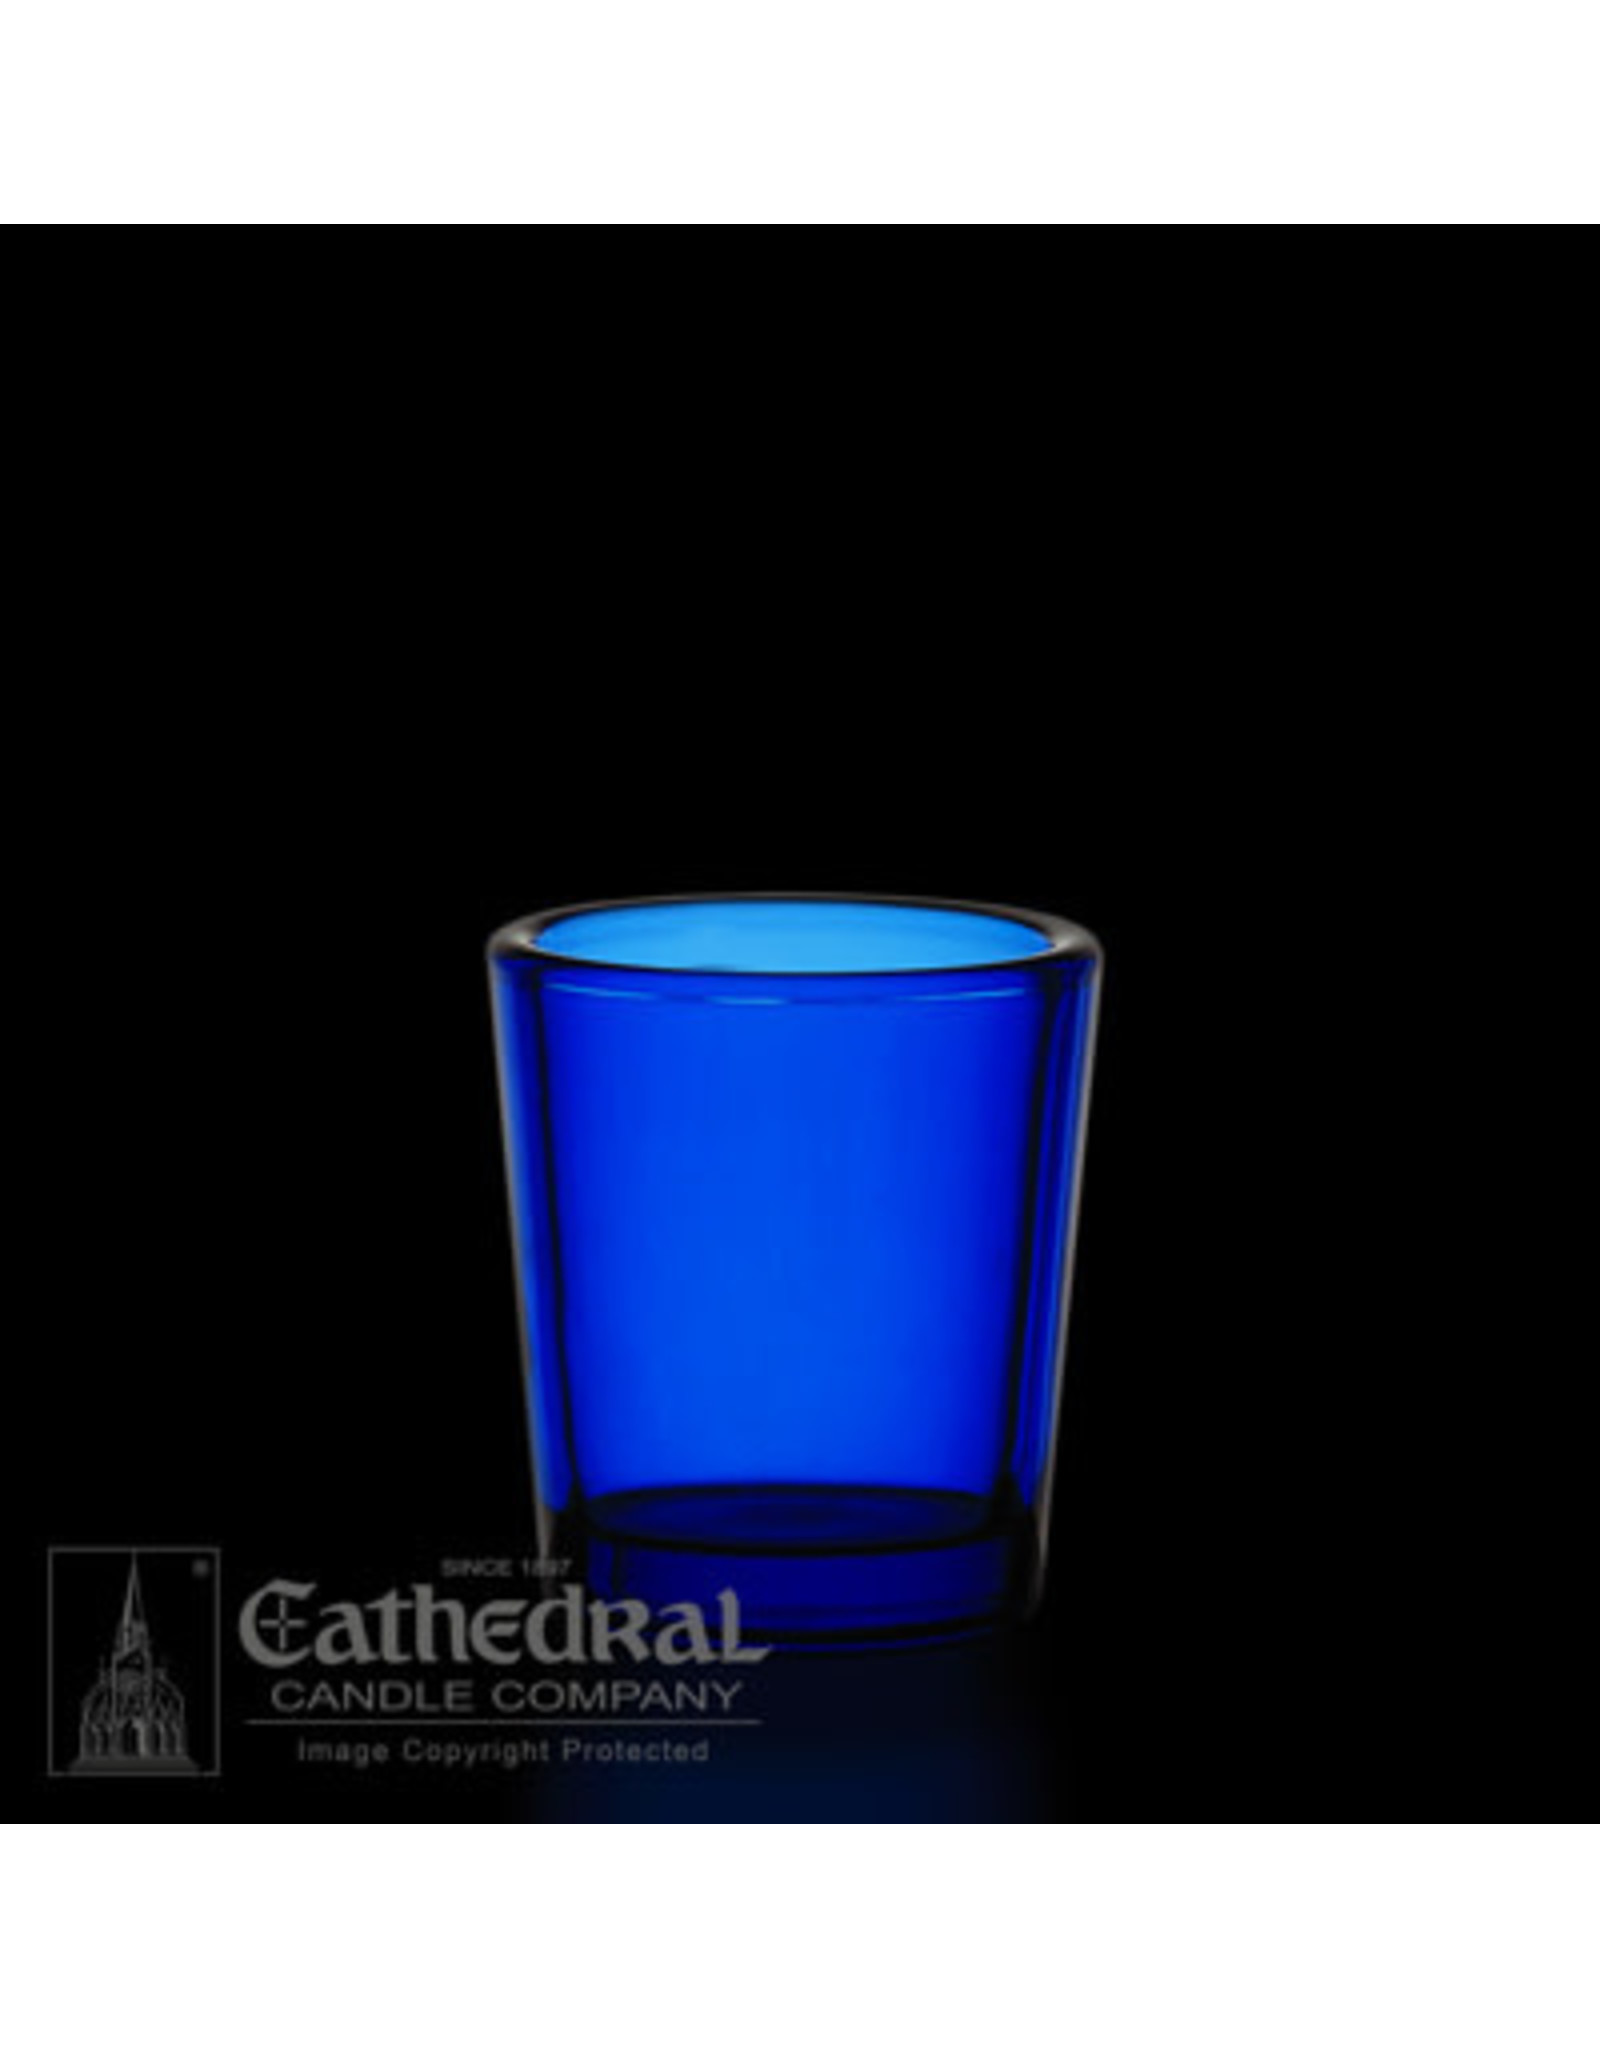 Cathedral Candle Votive Light Glass - Blue, 15 Hour (Each)